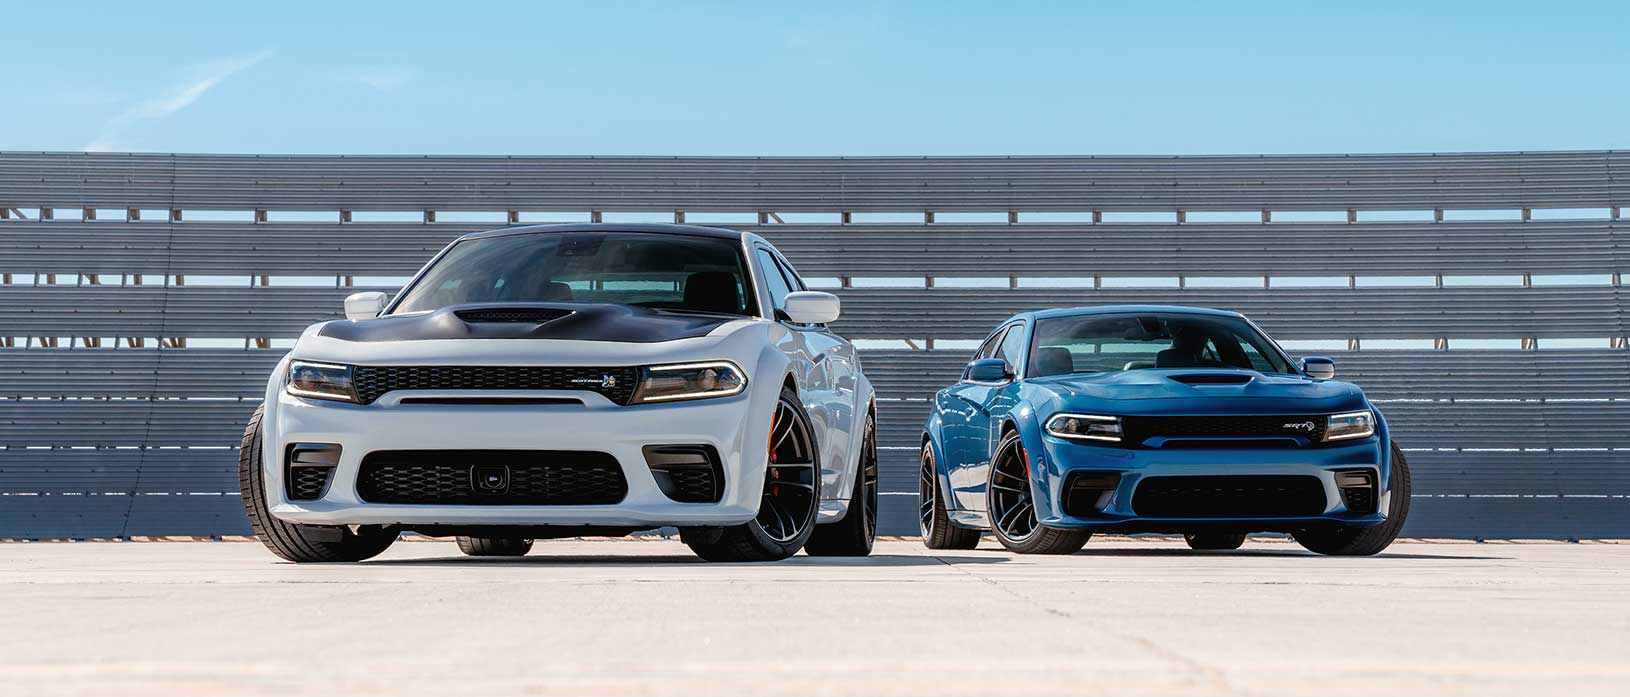 charger-gets-a-wider-stance-for-2020